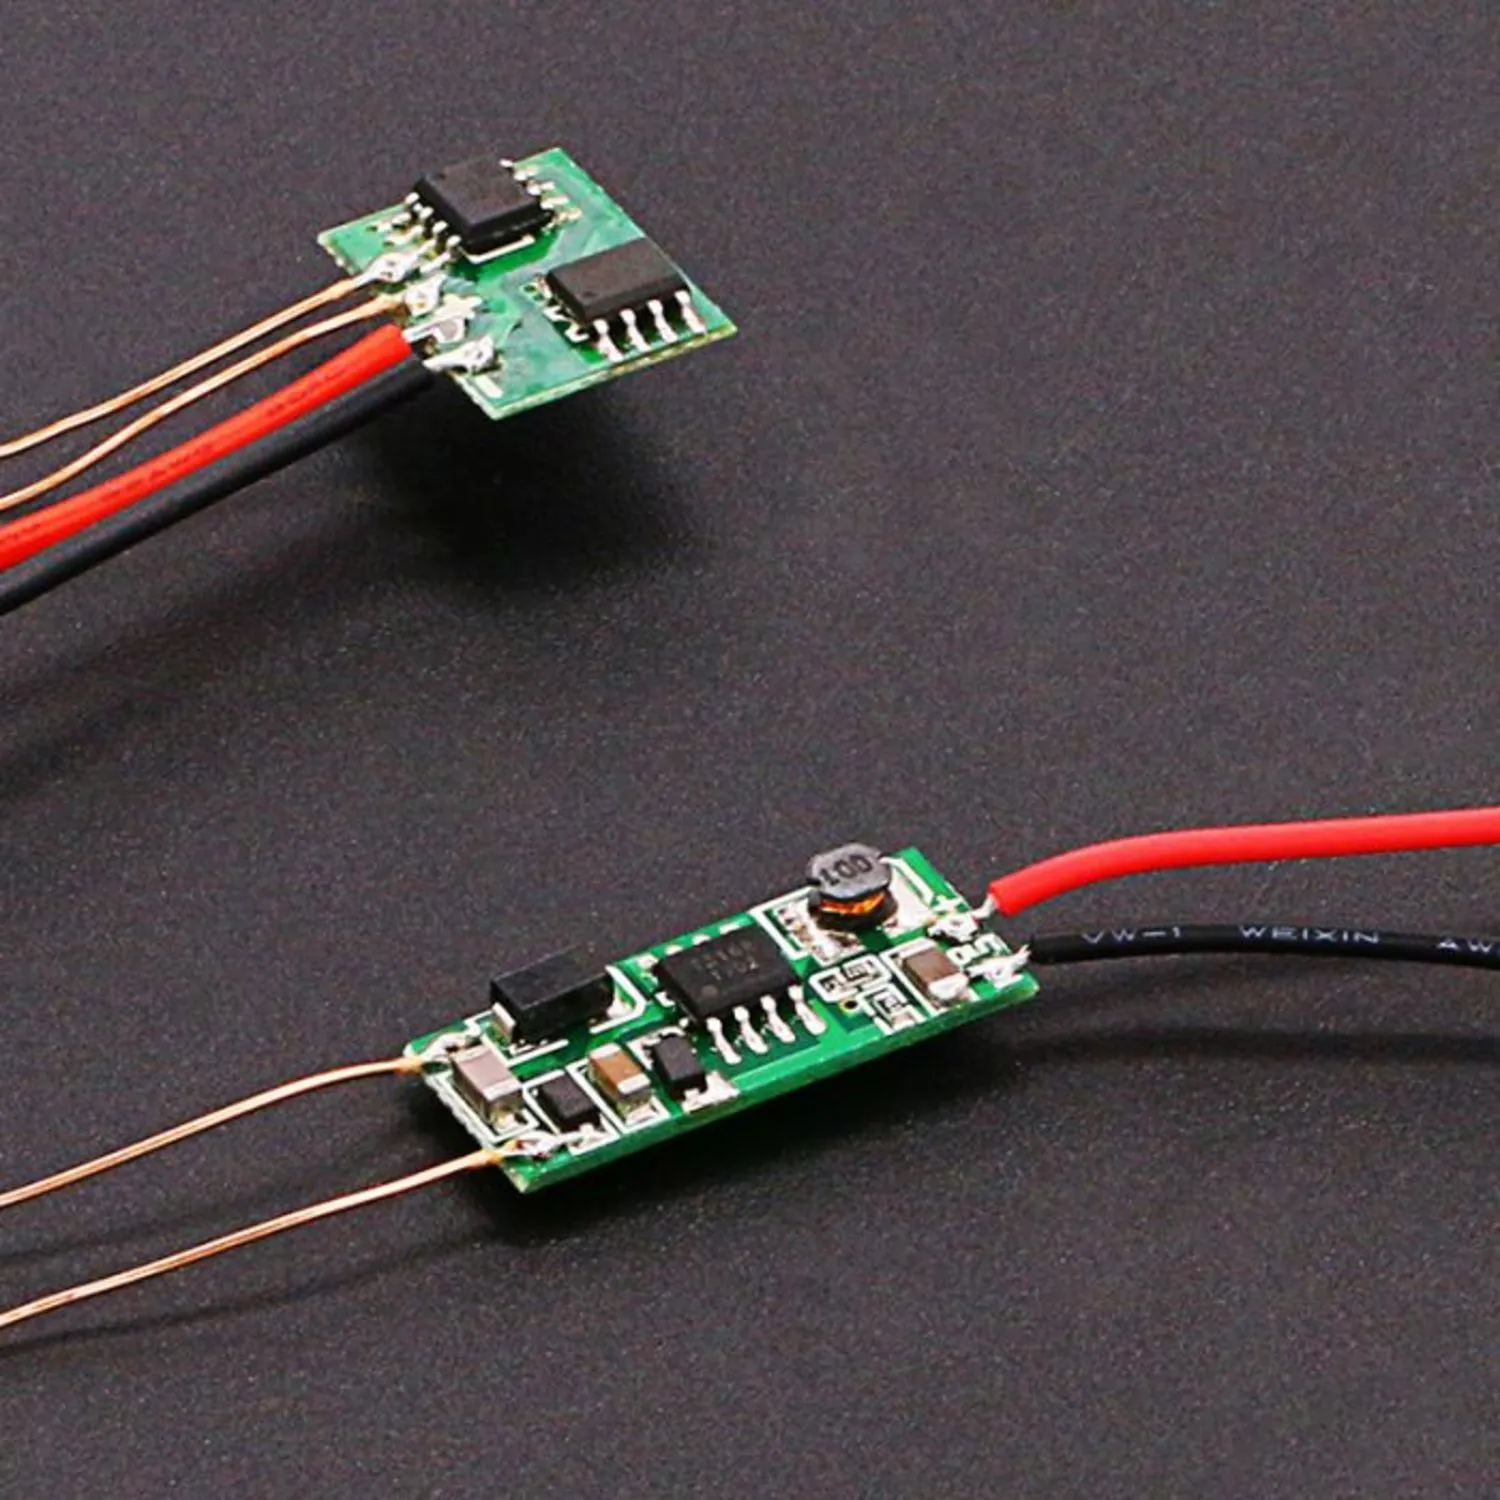 Photo of Wireless Charging Module Couple 9V PW-WCG-9V